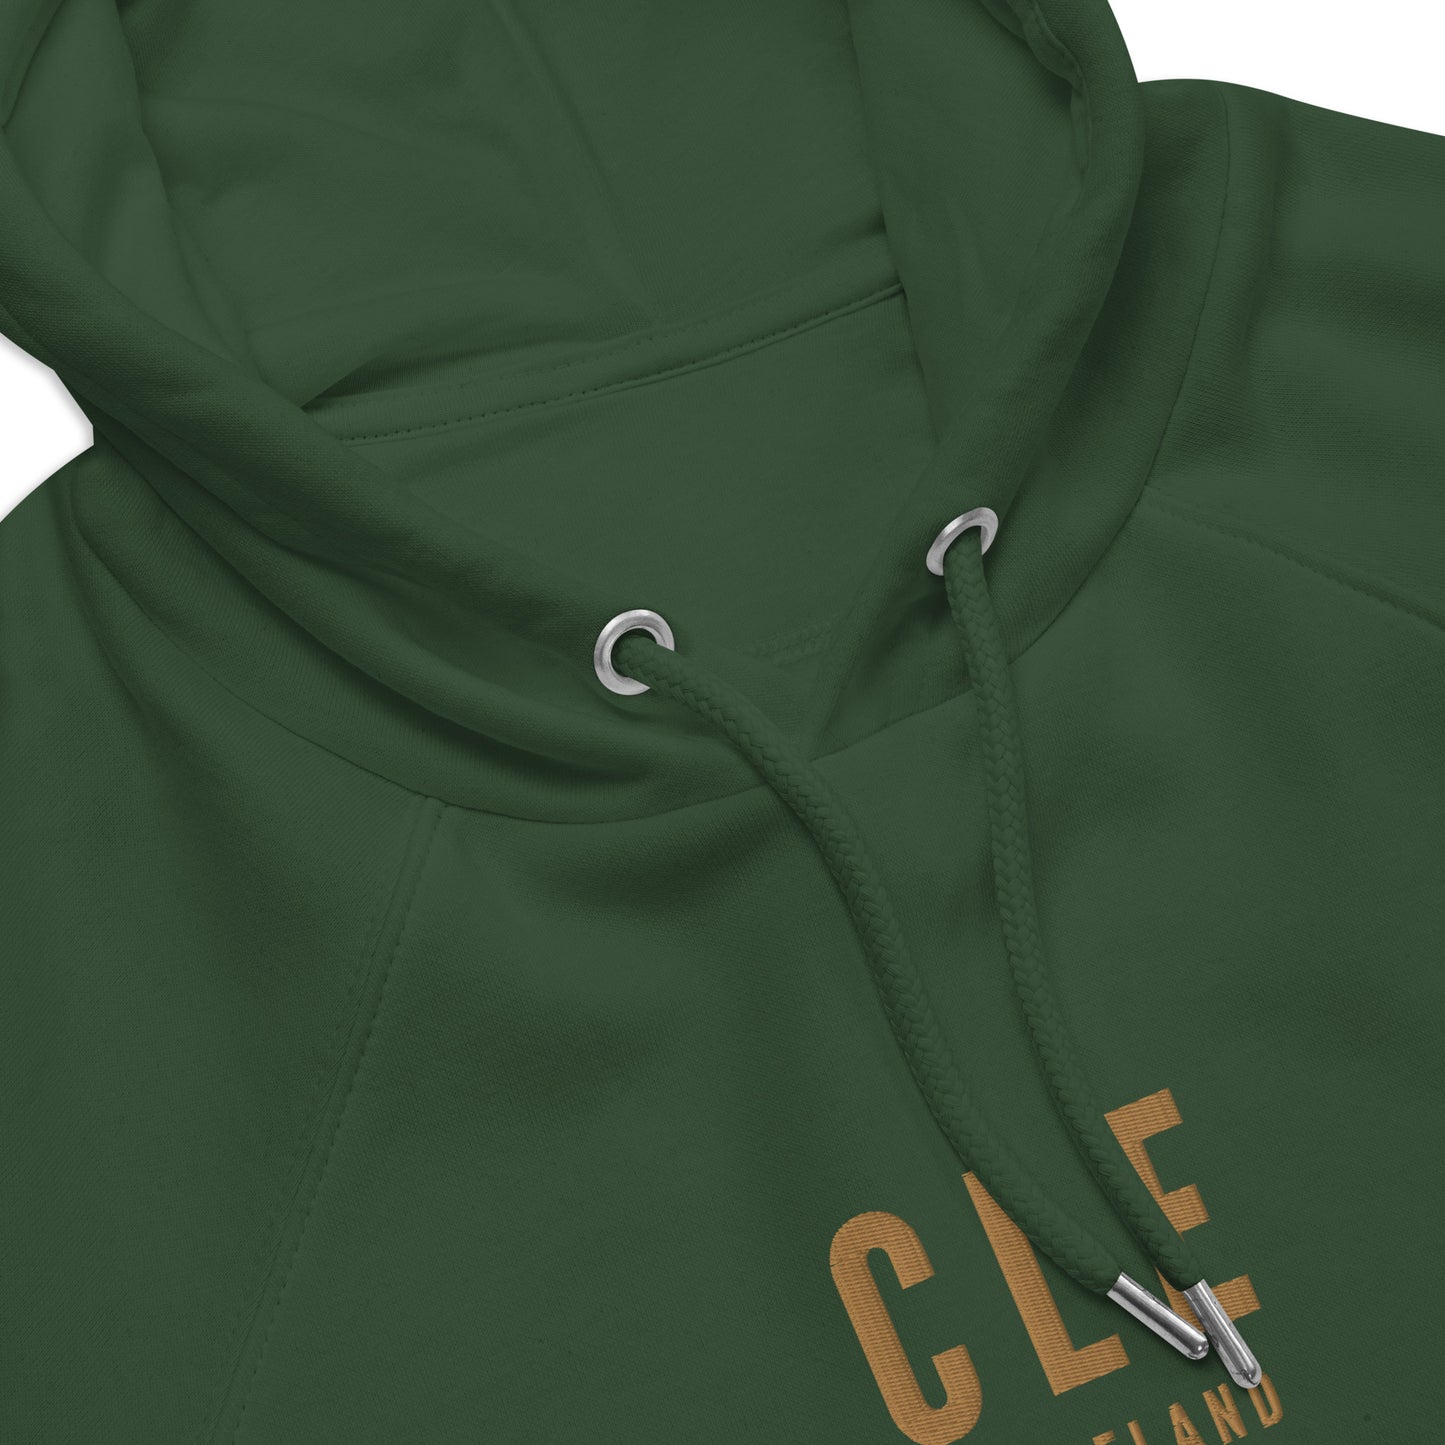 City Organic Hoodie - Old Gold • CLE Cleveland • YHM Designs - Image 07